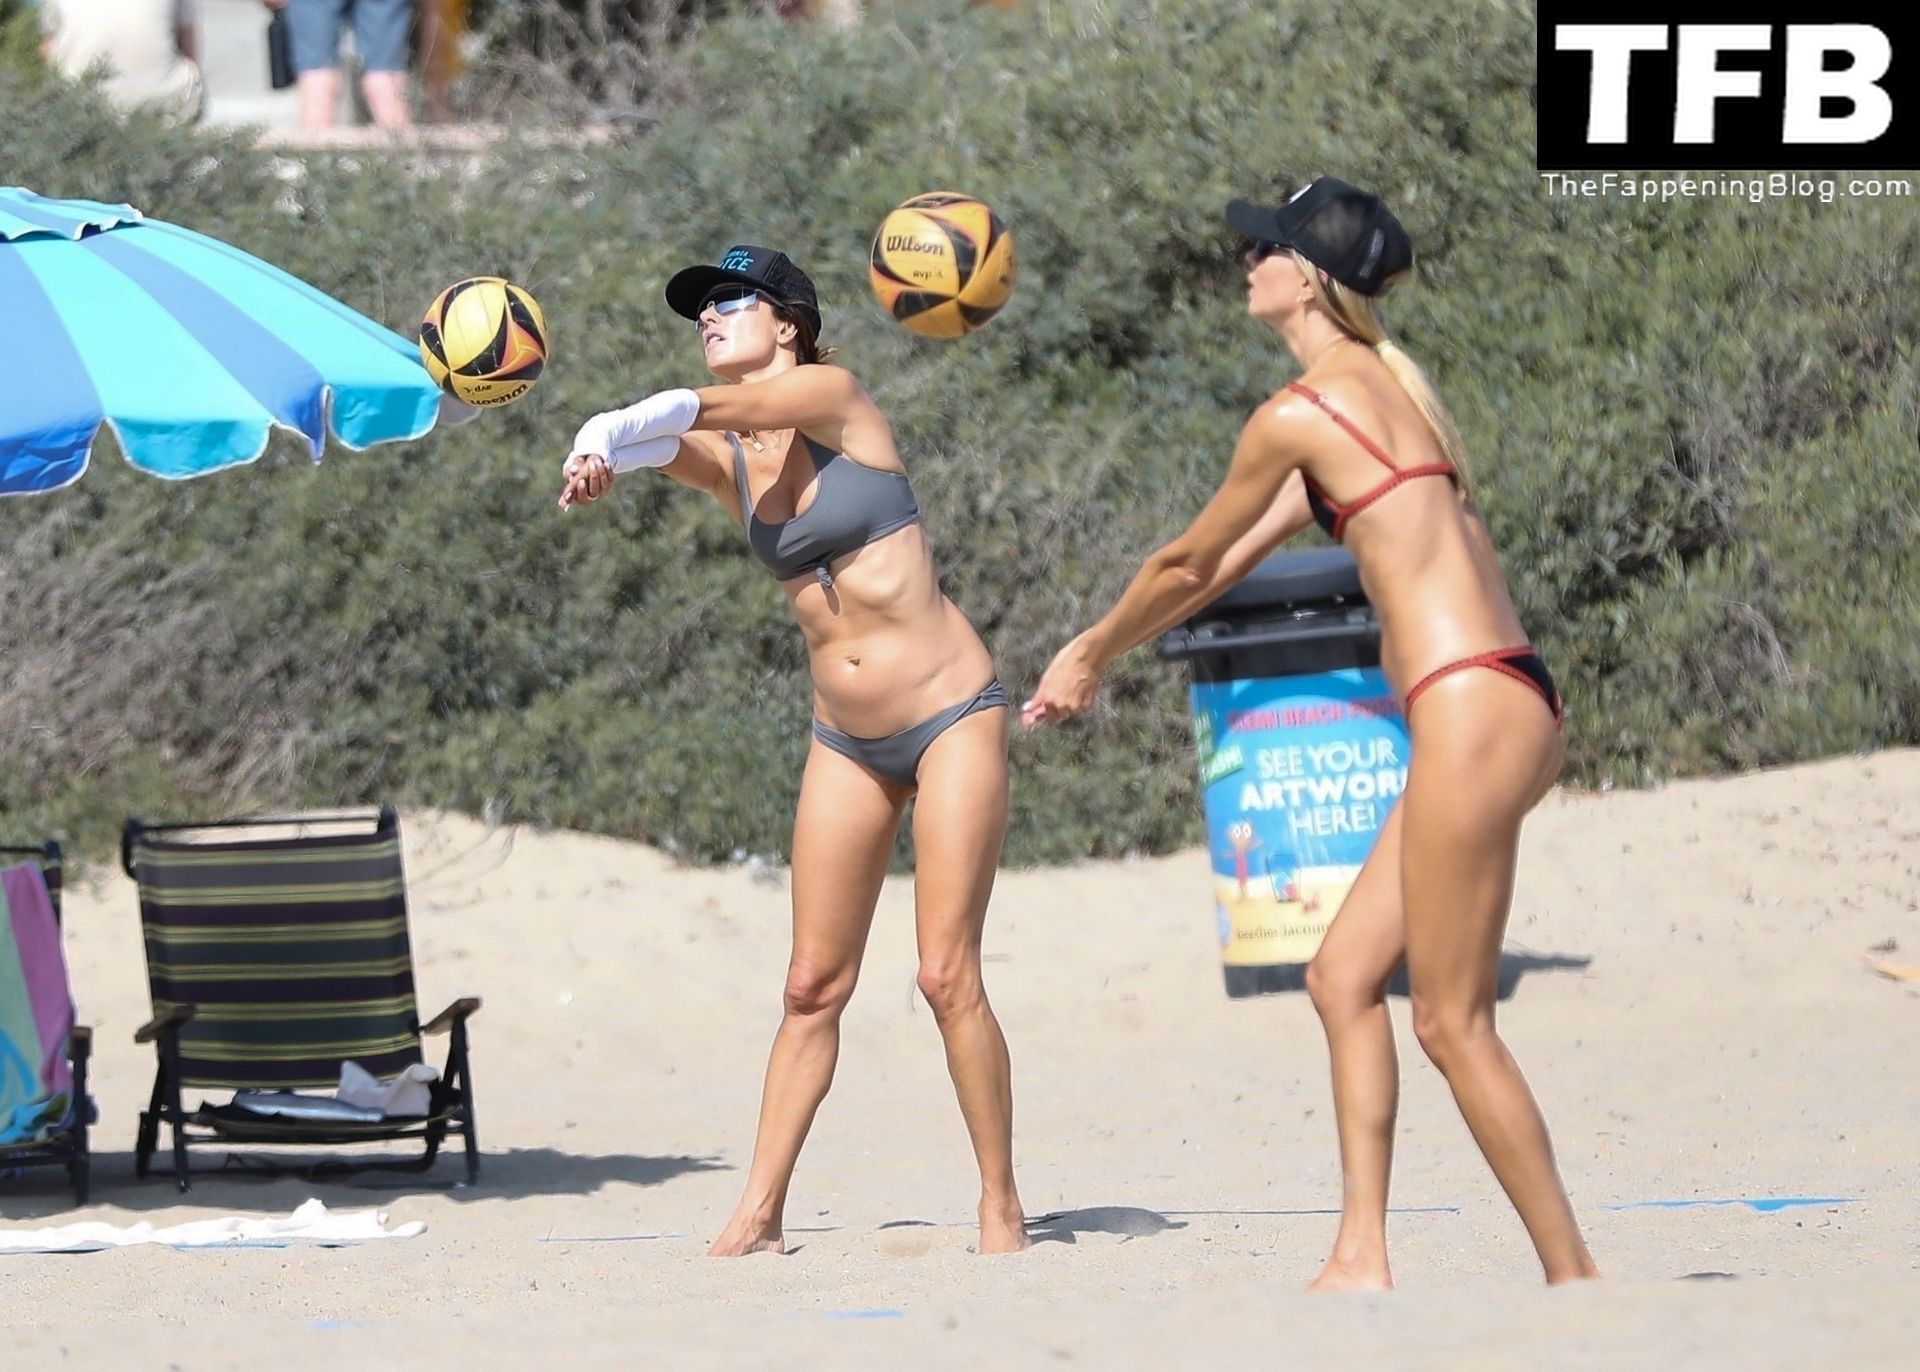 Alessandra Ambrosio Plays Beach Volleyball with Her Boyfriend and Fellow Model Friend (31 Photos)